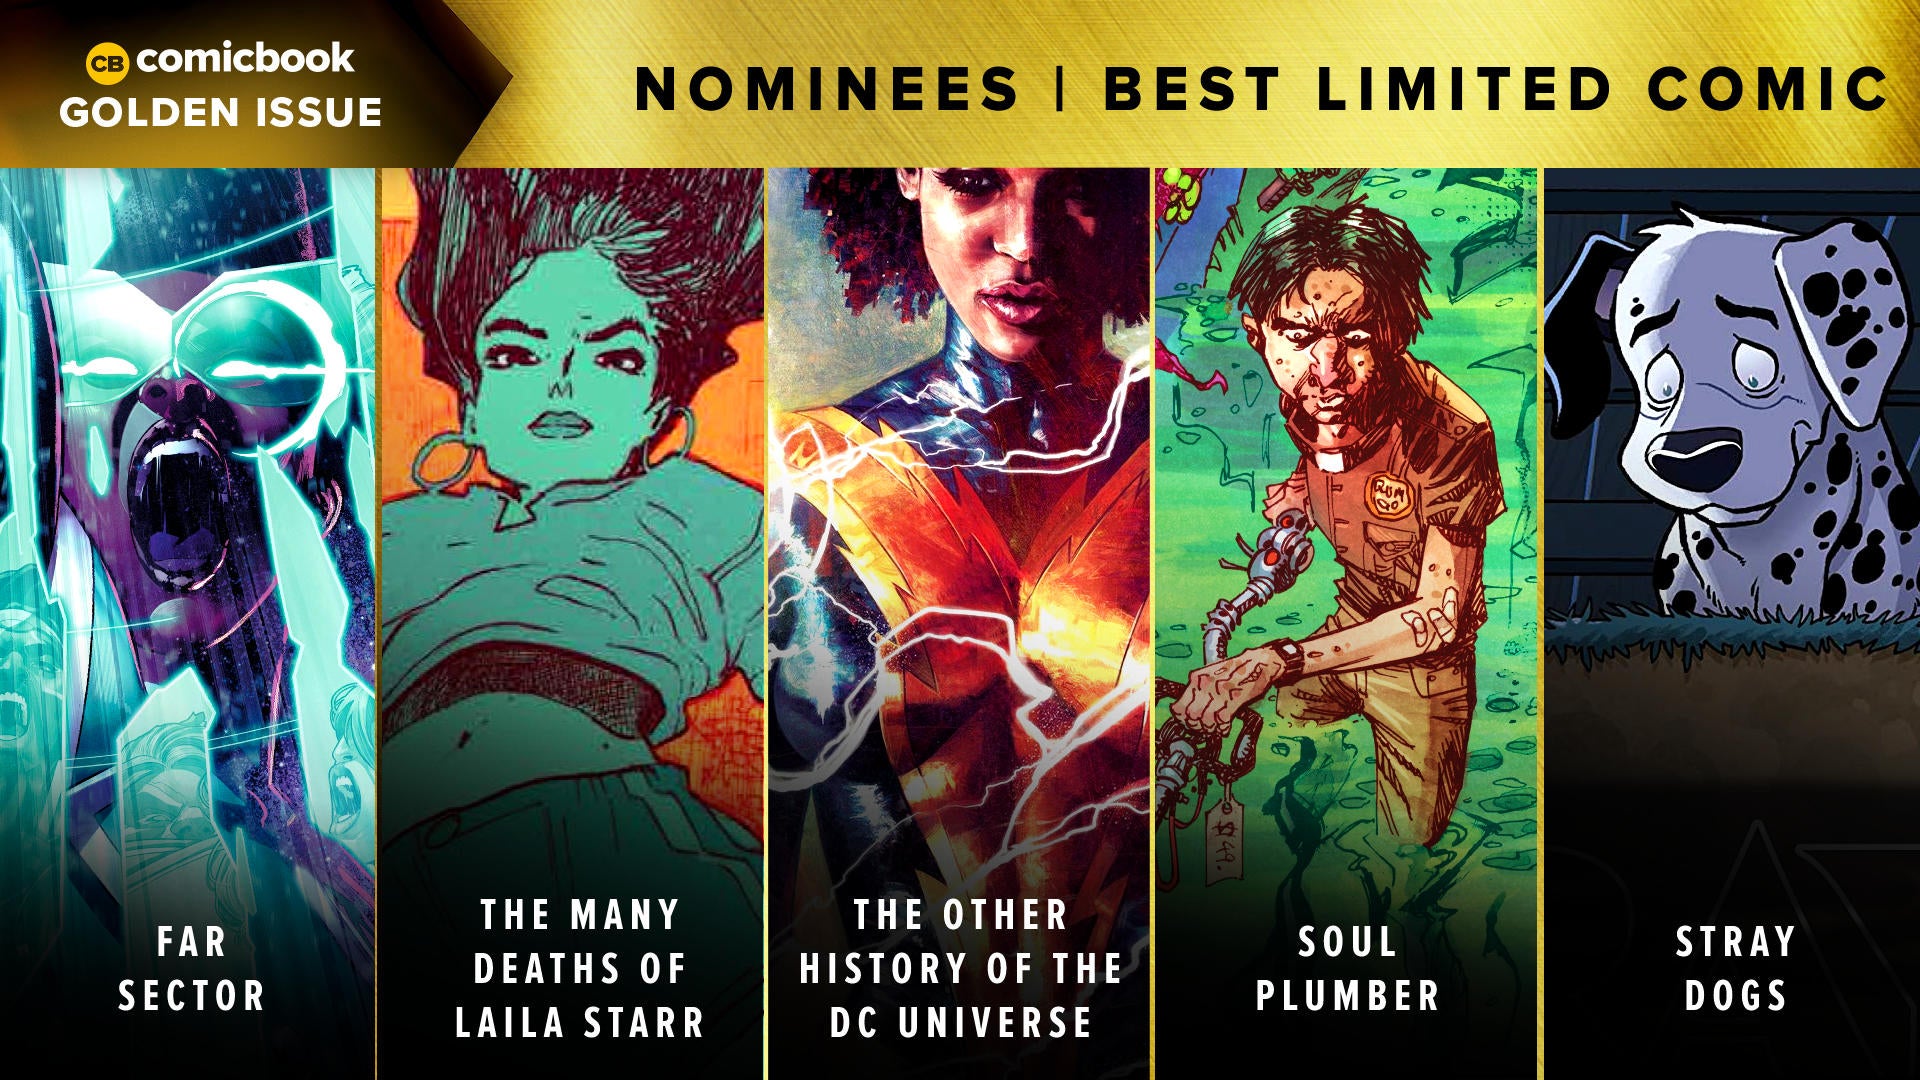 golden-issues-2021-nominees-limited-comic-series.jpg